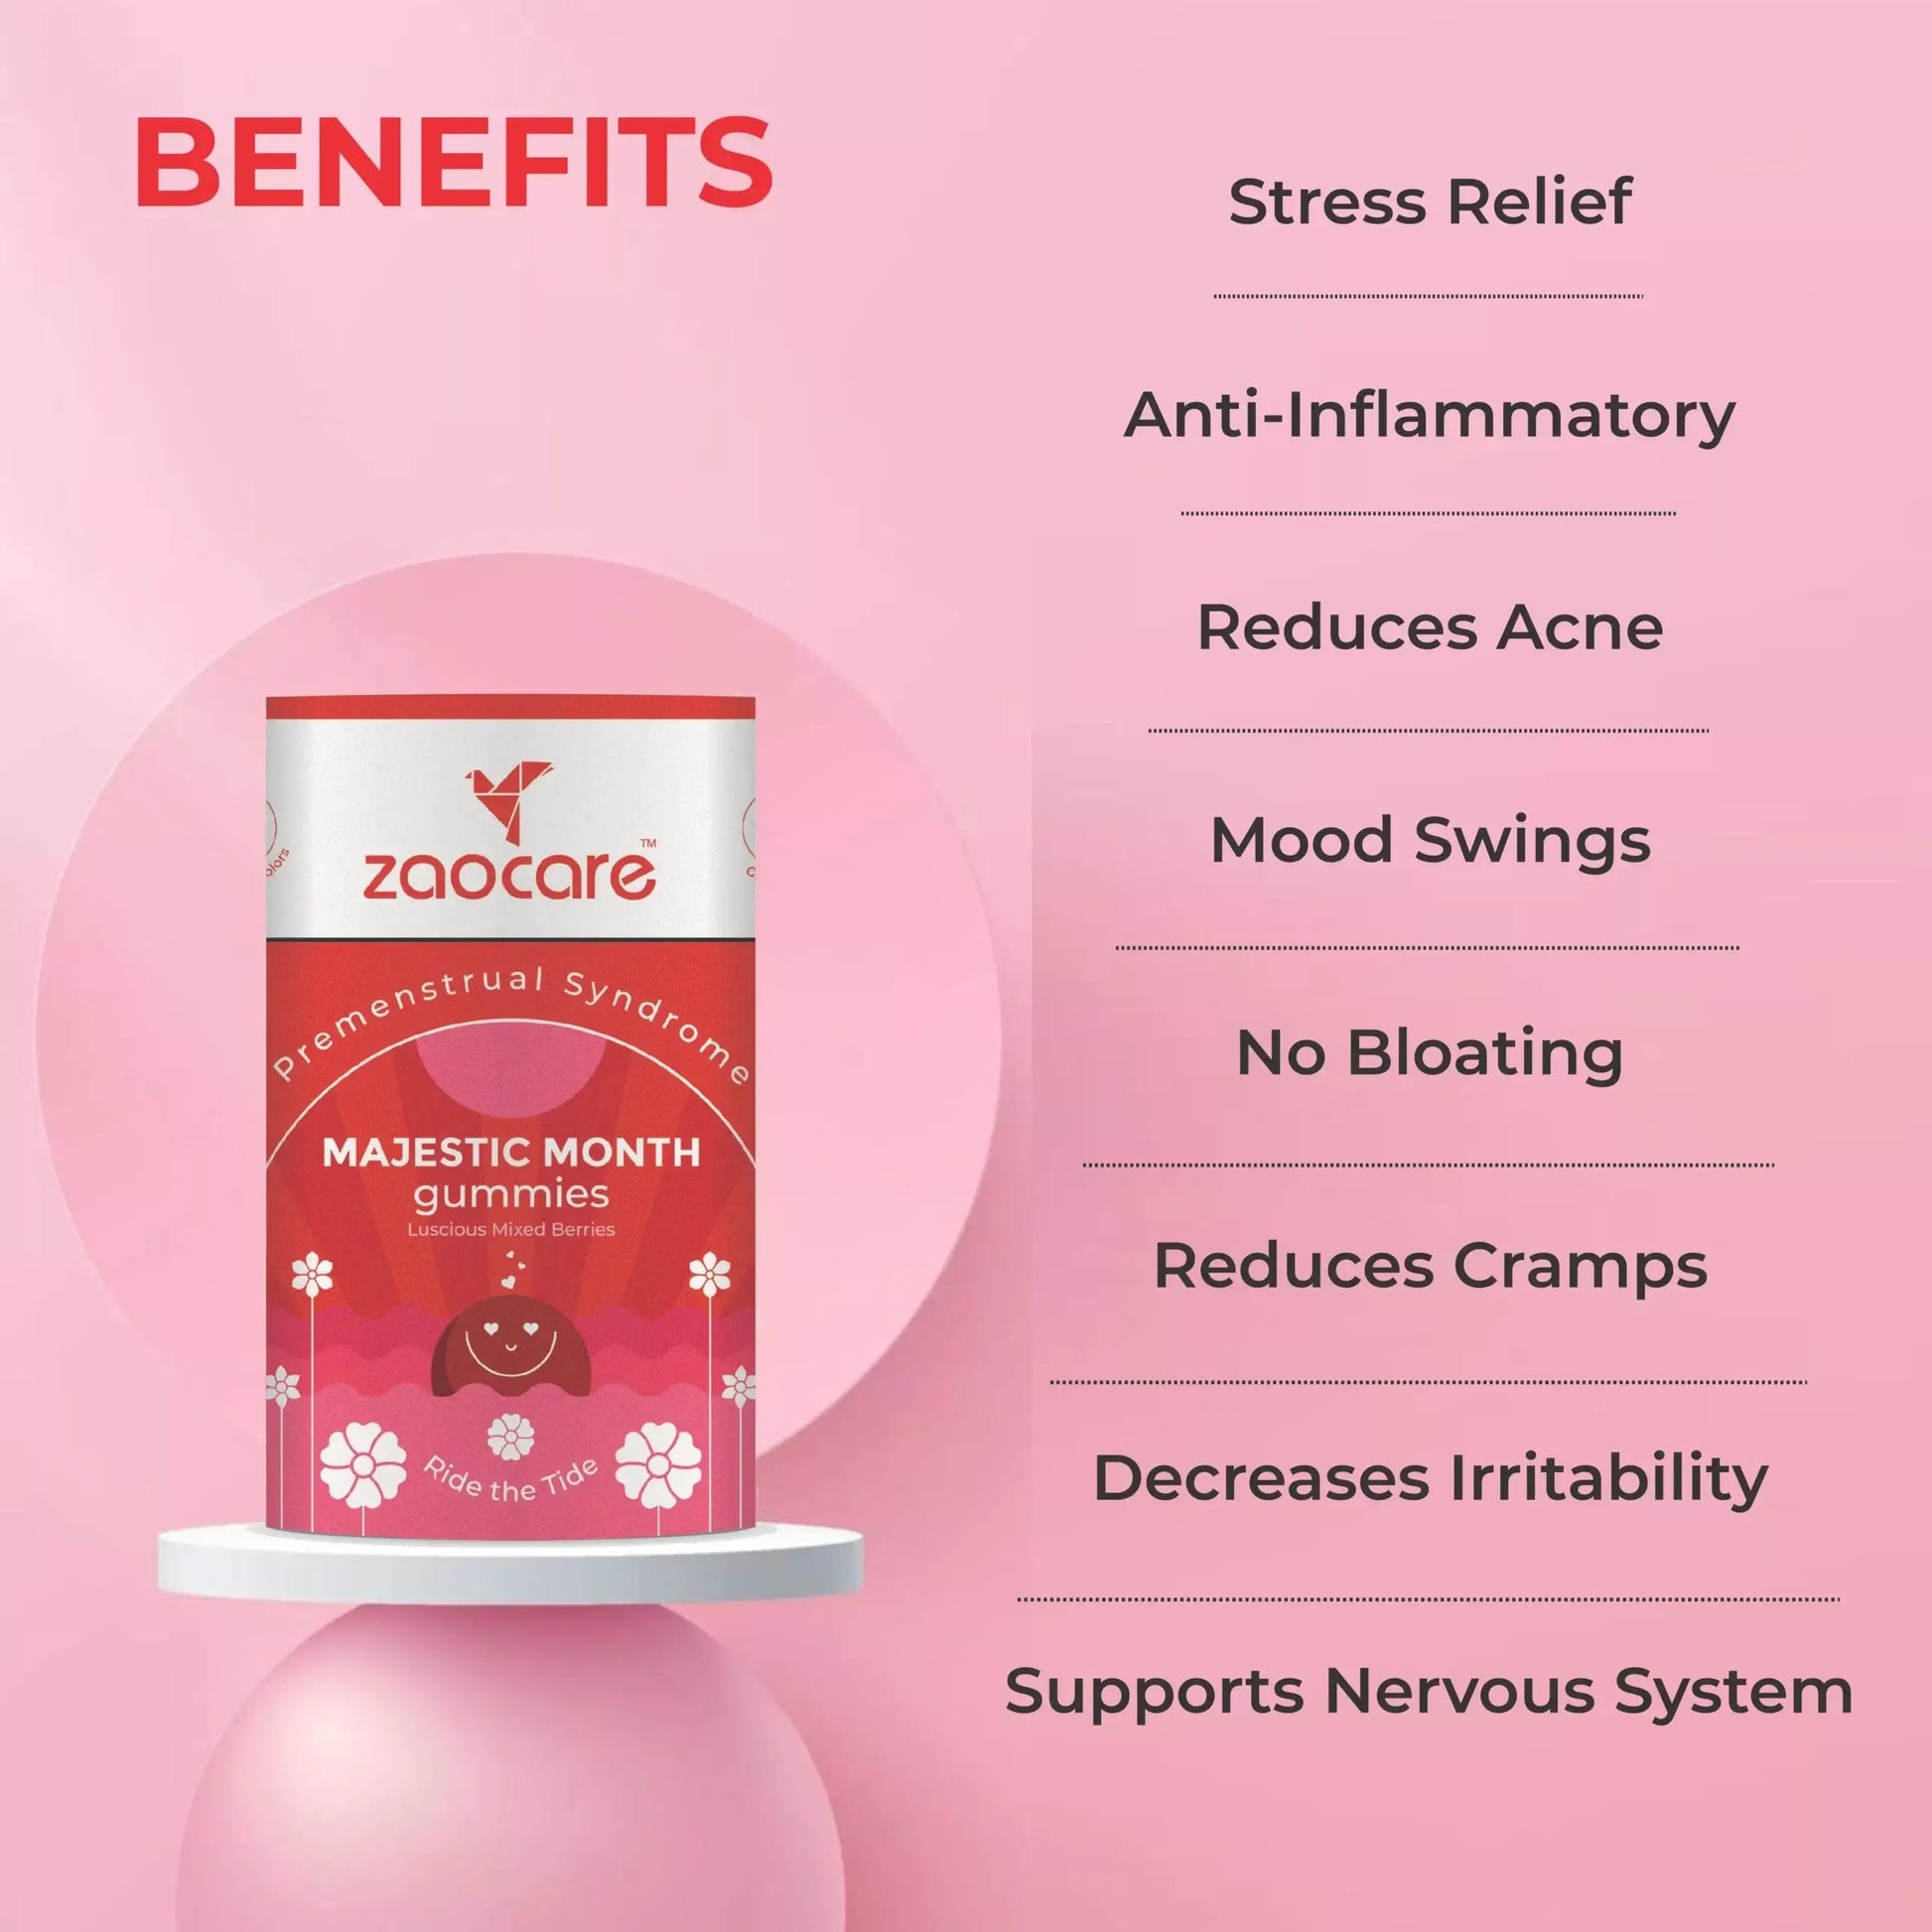 List of benefits provided by Zaocare's Majestic Month gummies including stress relief, anti-inflammatory properties, acne reduction, mood swing regulation, bloating prevention, cramp reduction, irritability decrease, and nervous system support